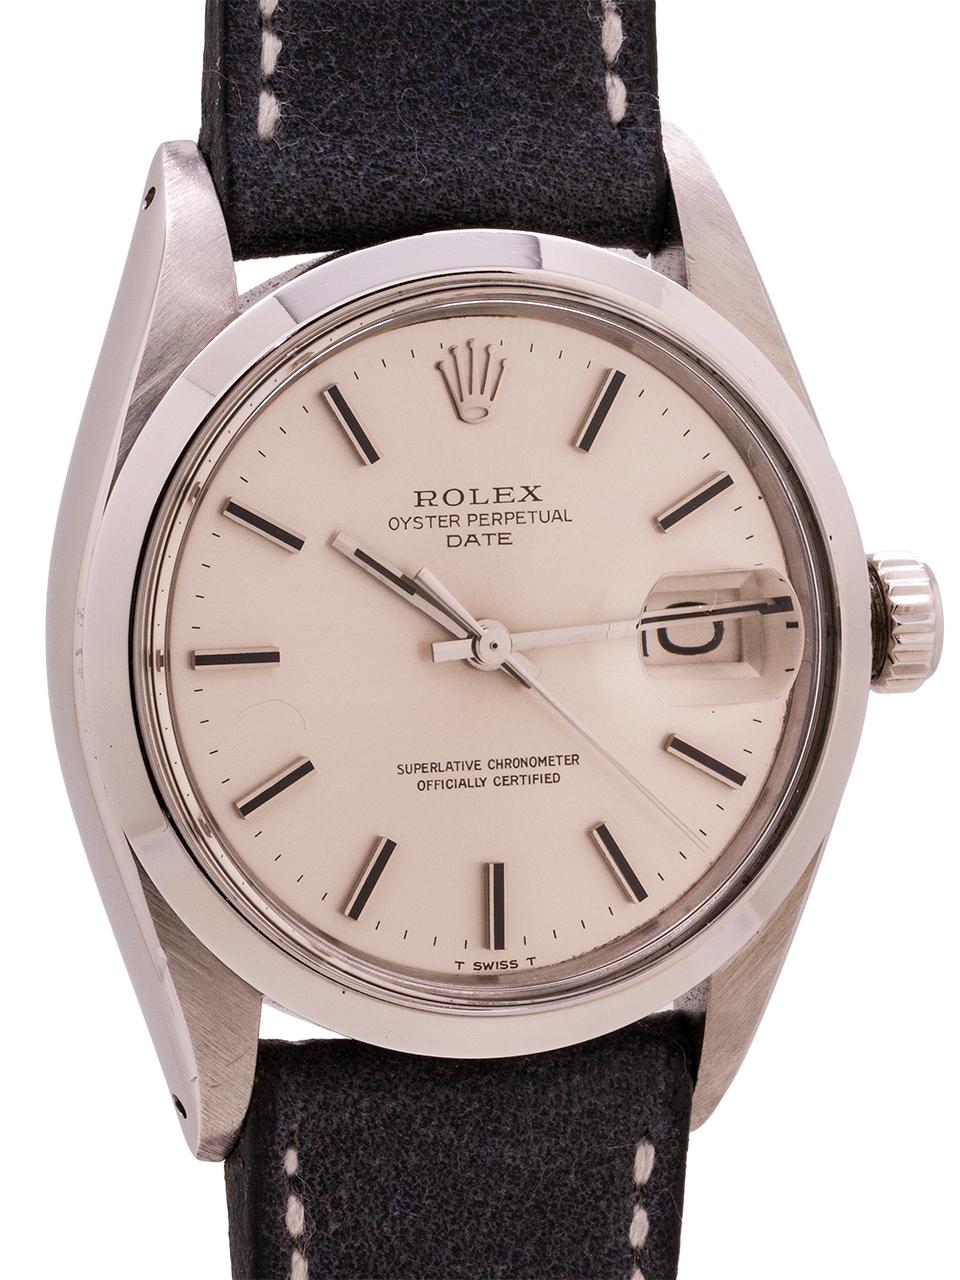 
Rolex stainless steel Oyster Perpetual Date ref# 1500 serial #2.5 million circa 1968. Featuring a 34mm diameter Oyster case with smooth bezel and acrylic crystal and mint condition silver dial with fine applied, black inlaid, hour indexes and stick